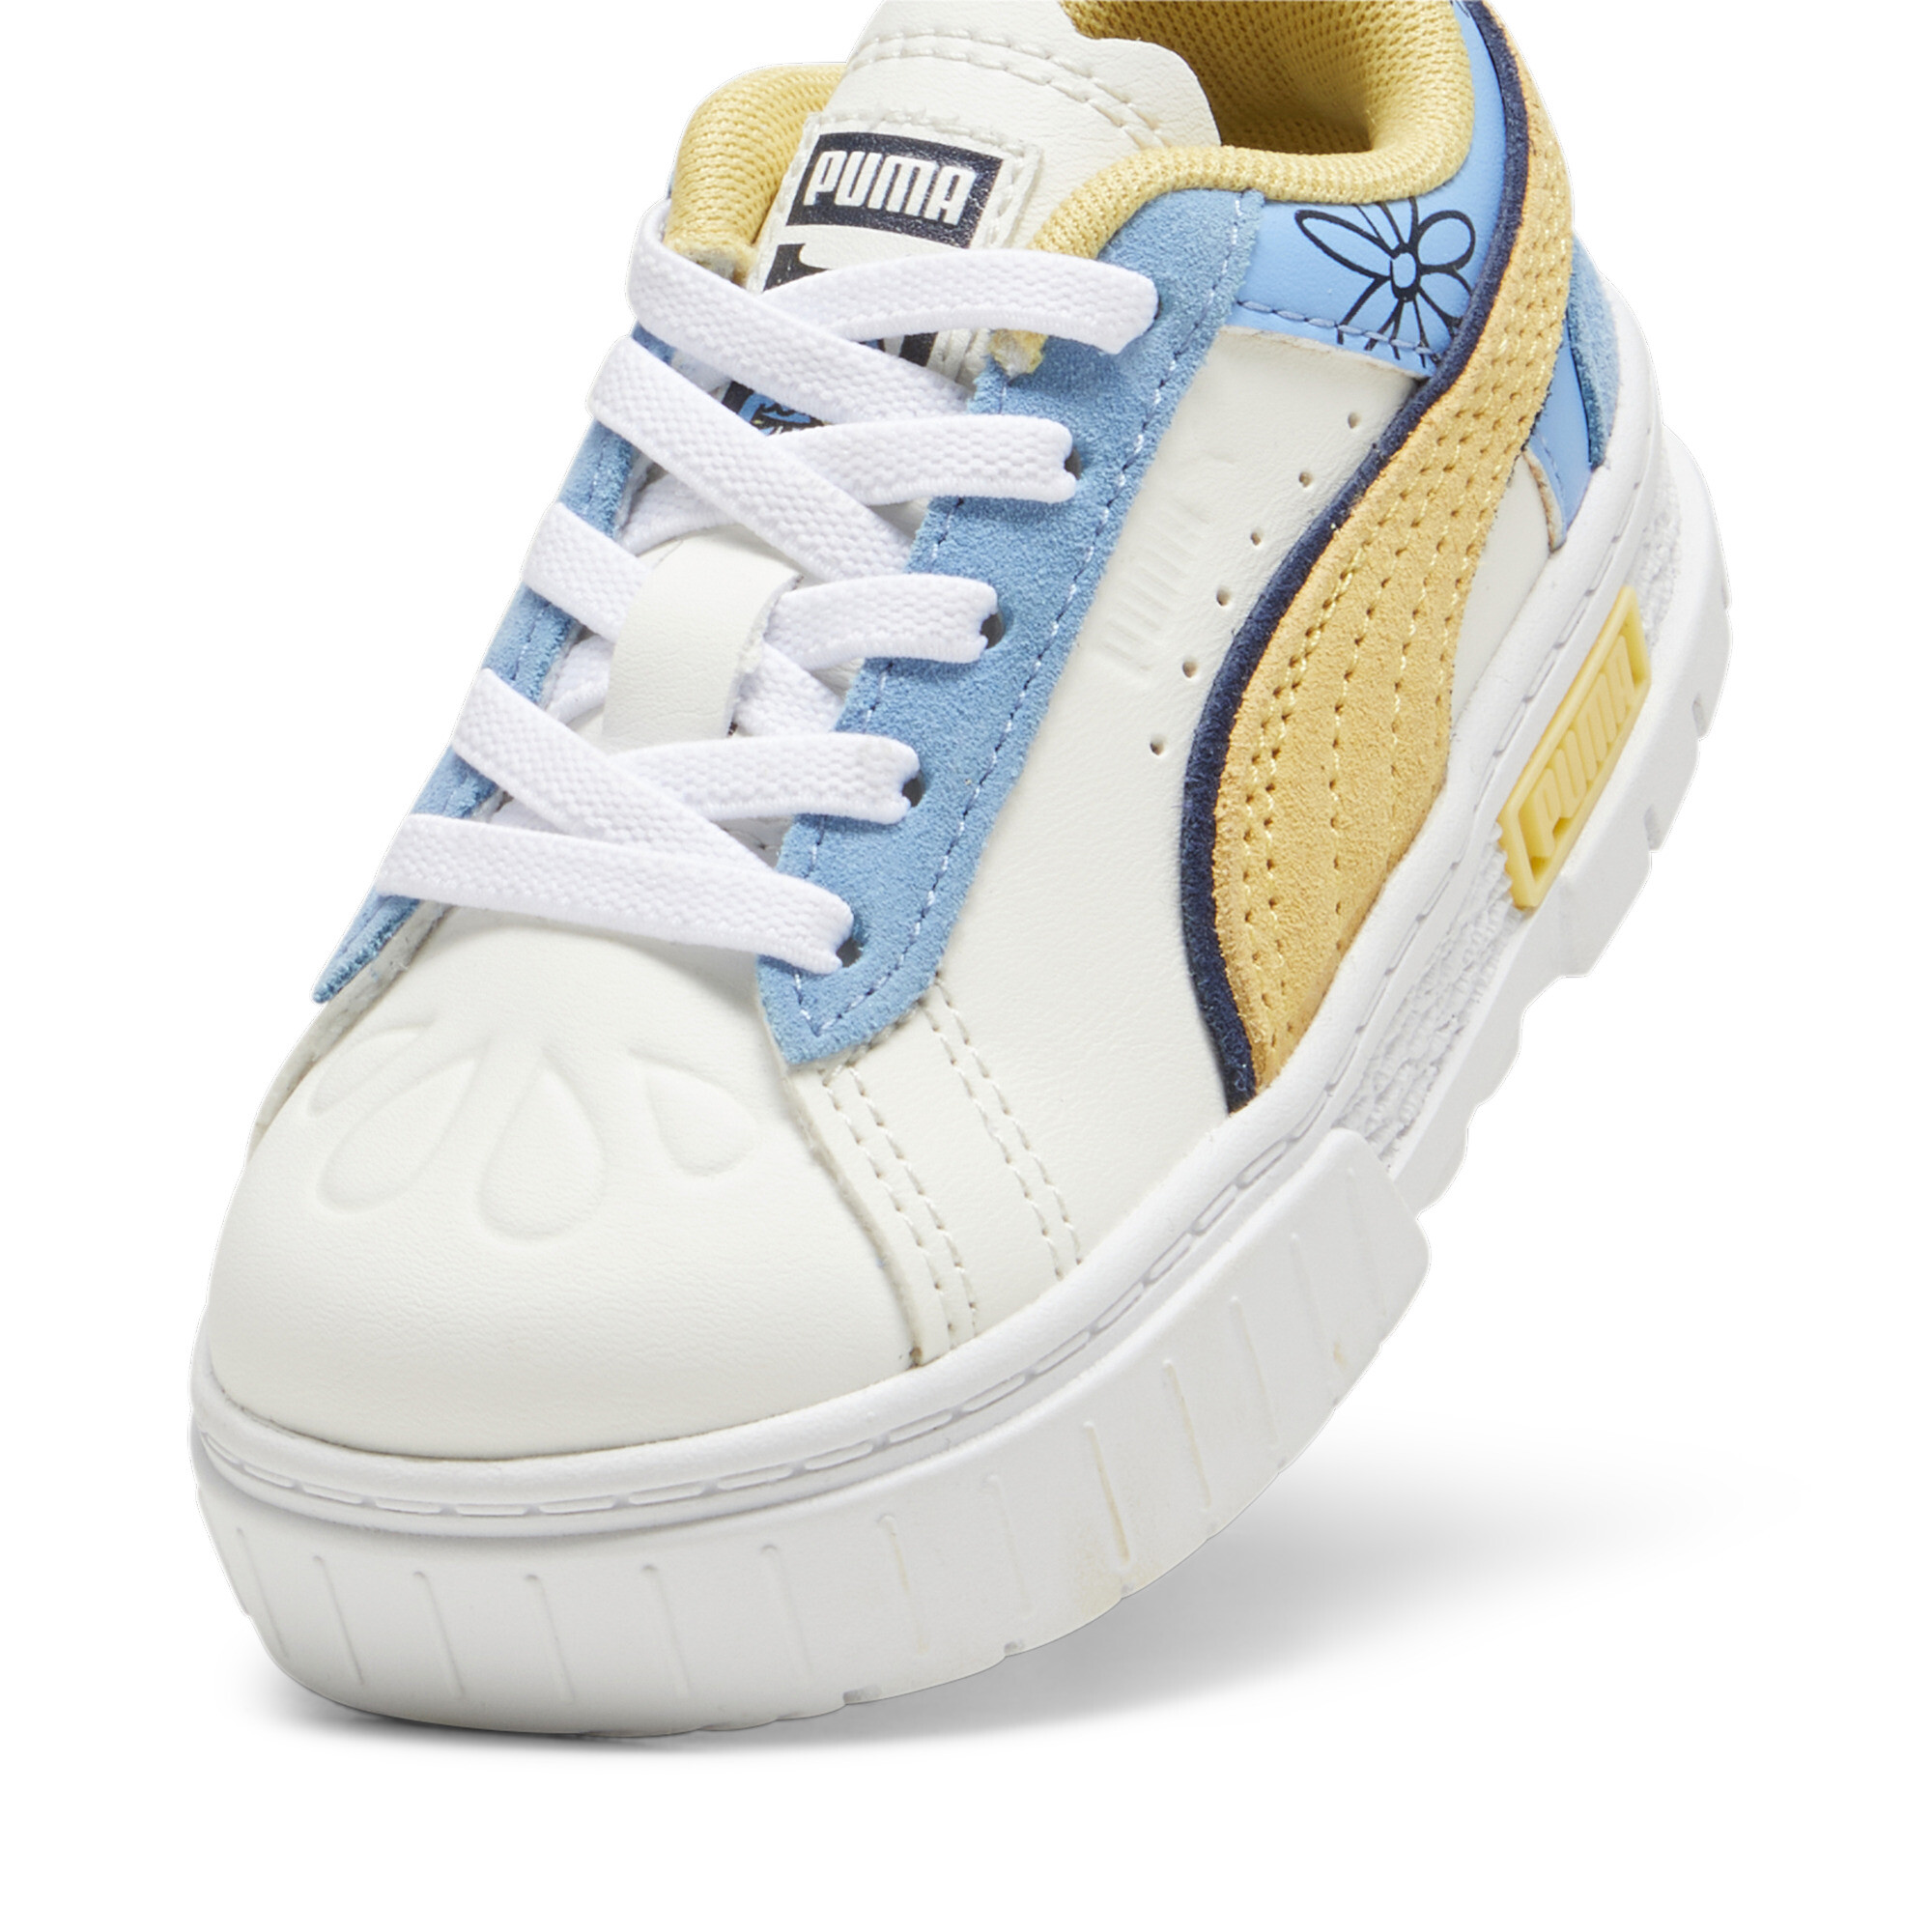 Women's Puma X THE SMURFS Mayze Toddlers' Sneakers, White, Size 22, Shoes